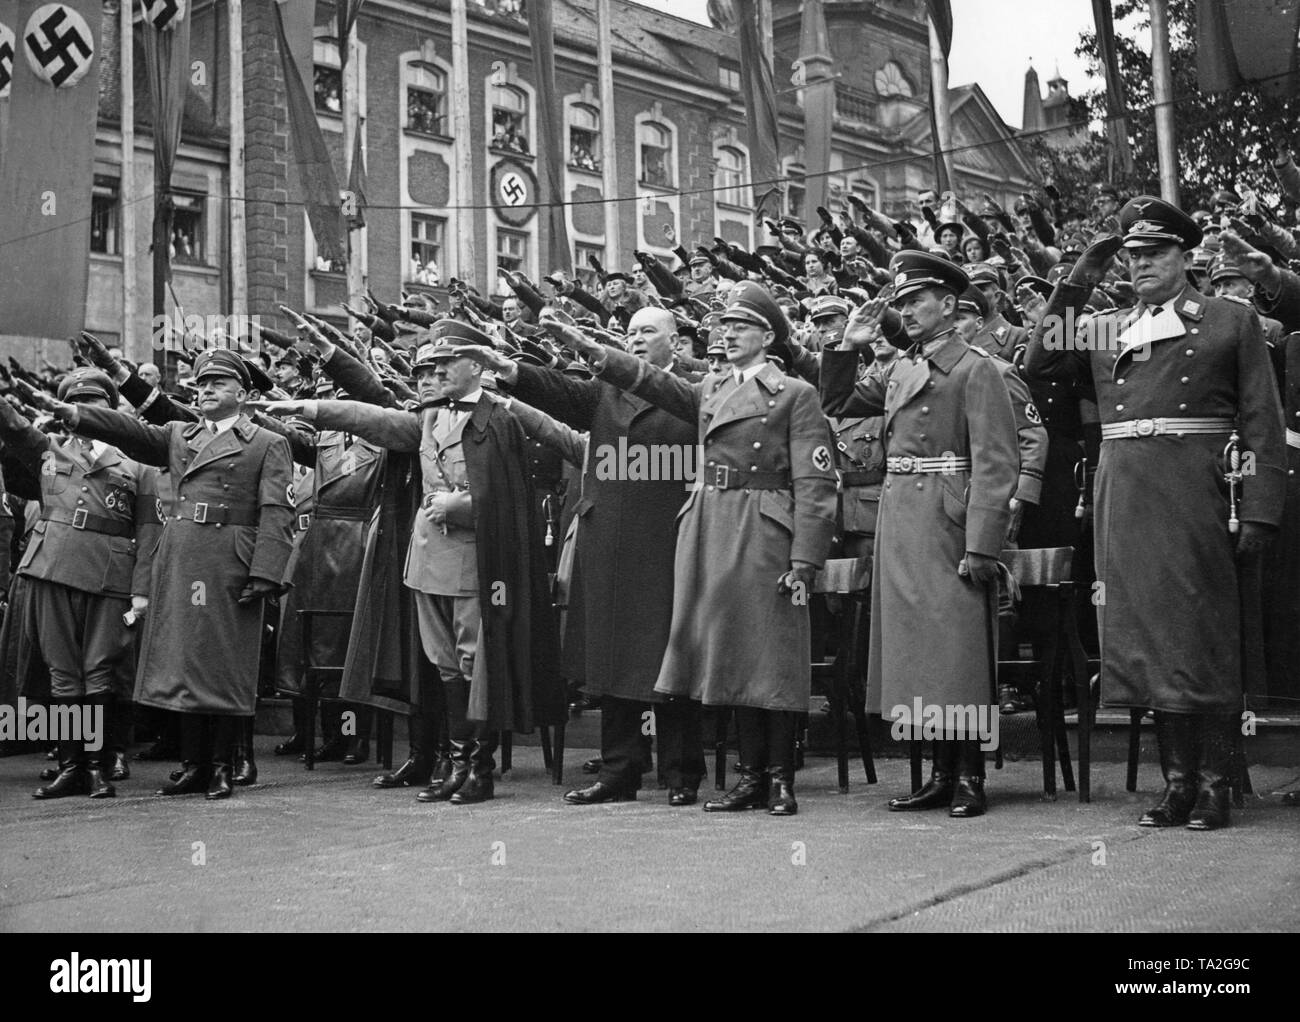 The construction of the Munich U-bahn began in 1938 with a grand ceremony. From left to right: Robert Ley, Adolf Wagner, Adolf Hitler, Dr. Dorpmueller, Ludwig Siebert, Ritter v. Schobert and Hugo Sperrle. Stock Photo